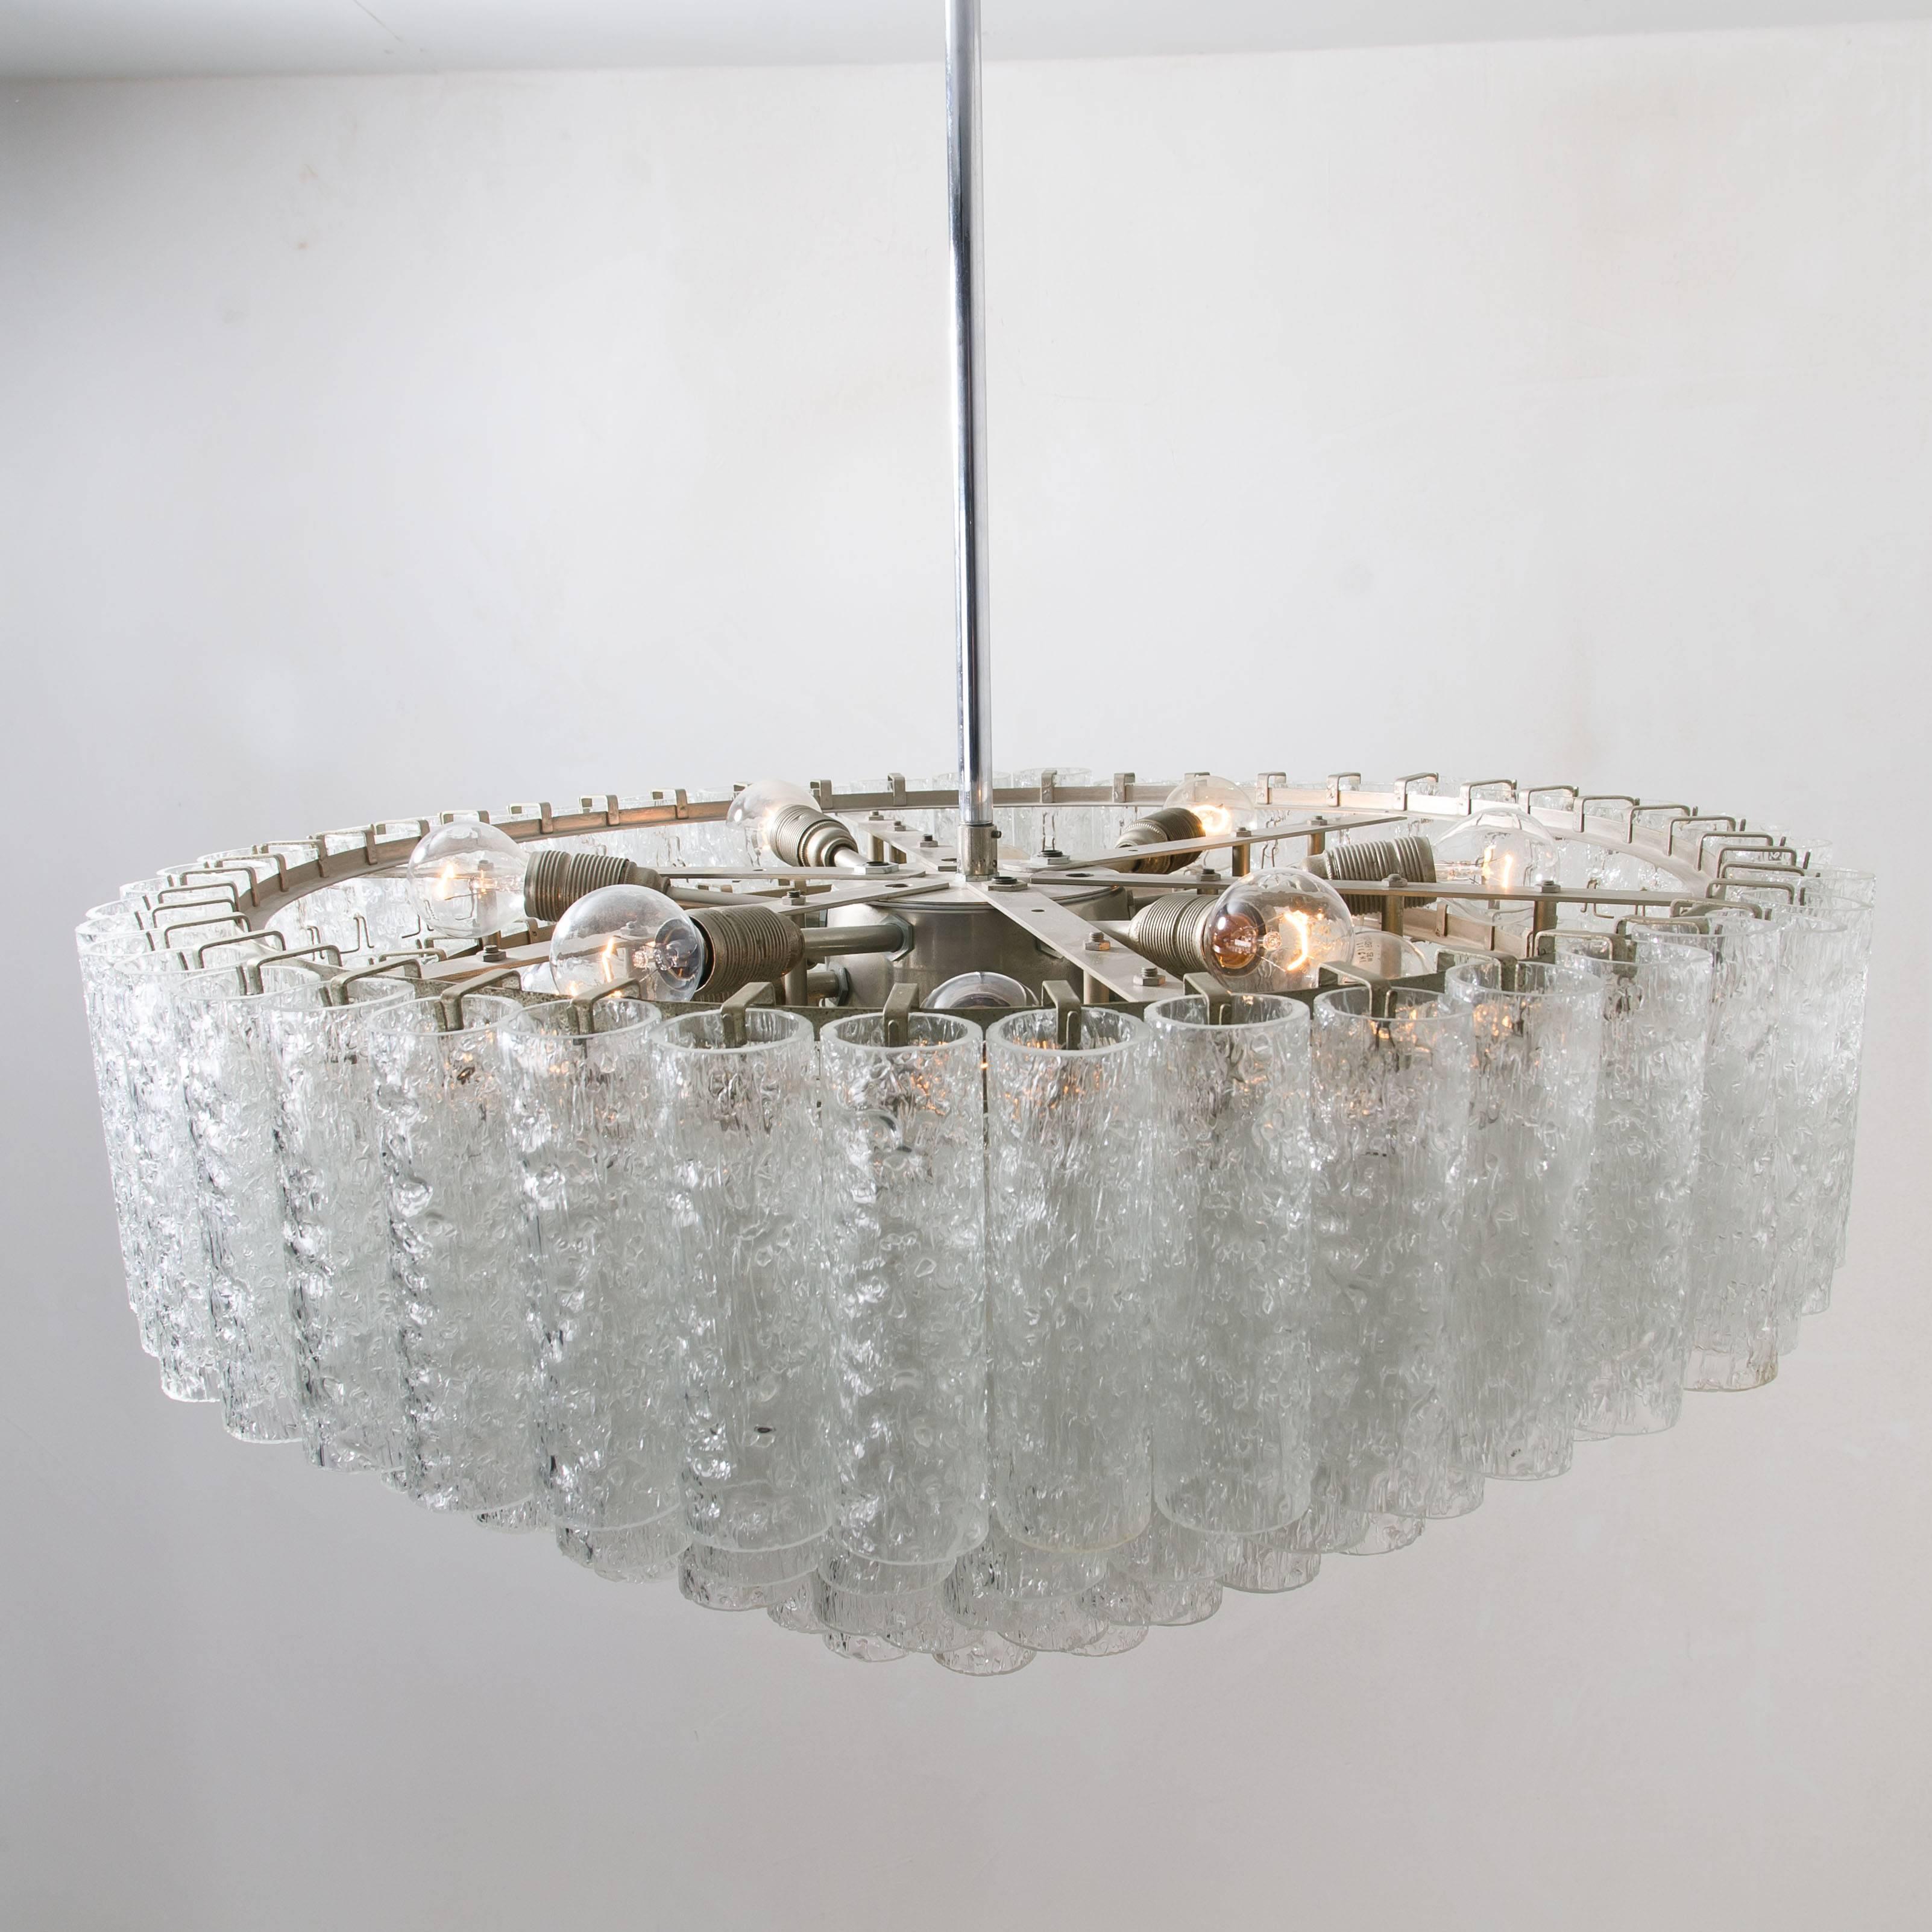 German Pair of Doria Giant Ballroom Chandeliers Flush Mounts with 130 Blown Glass Tubes